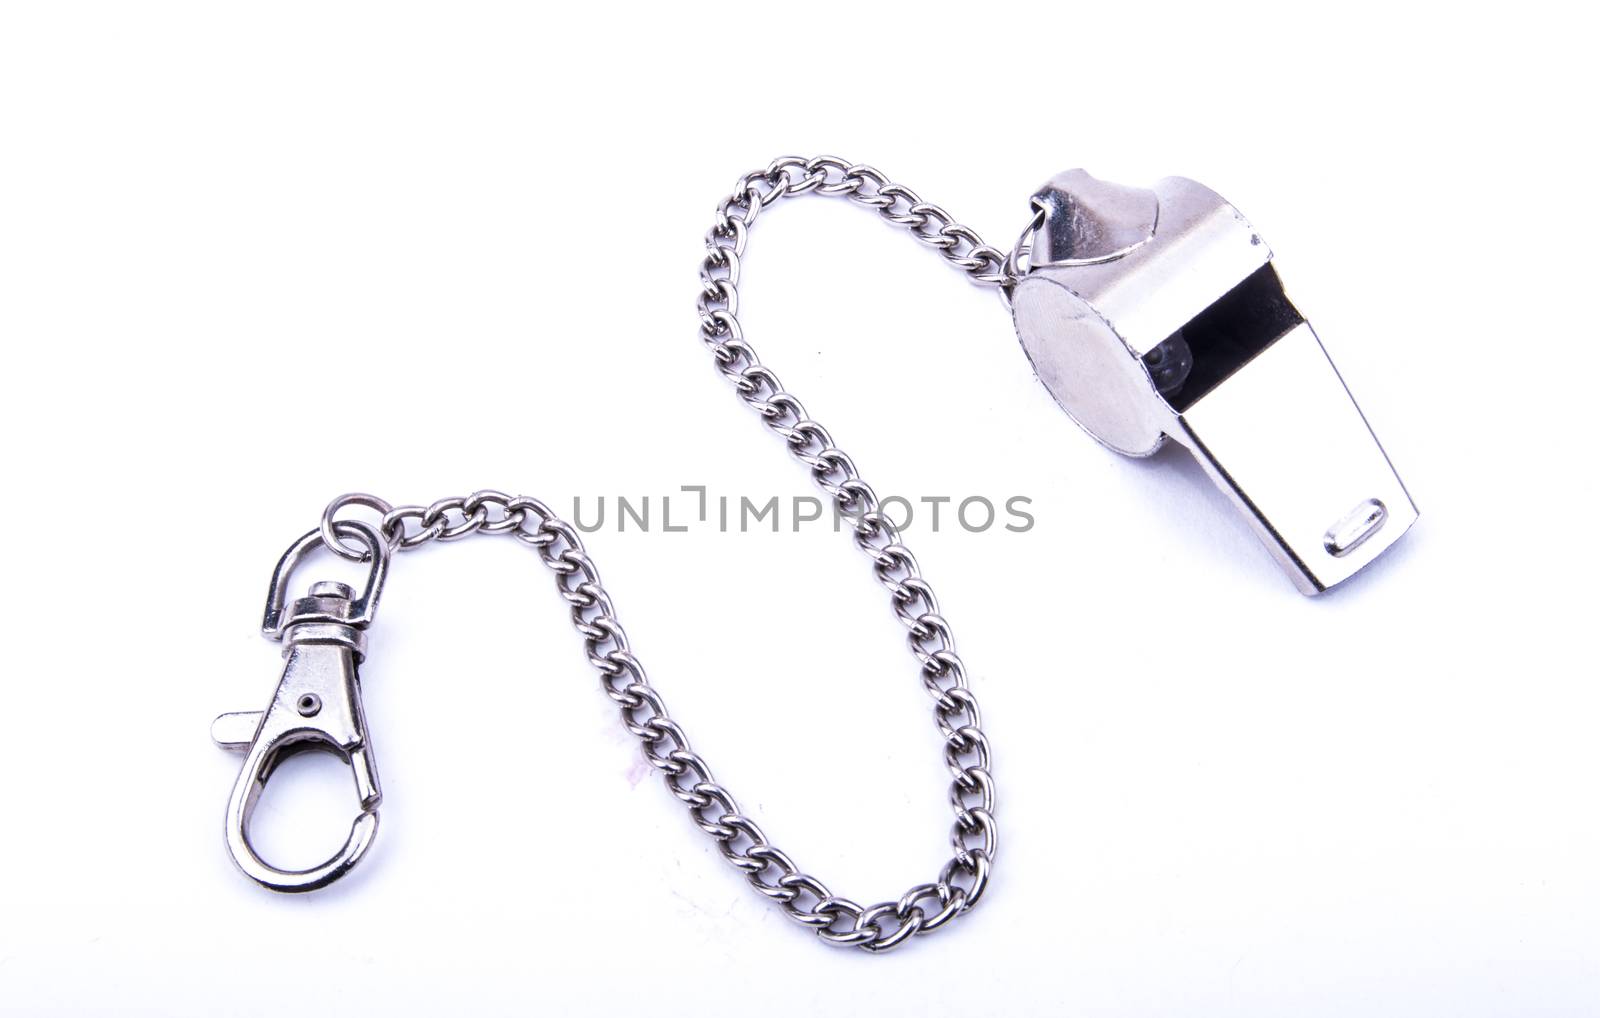 the beautiful world cup whistle with stainless steal ornamental chain
on the white background